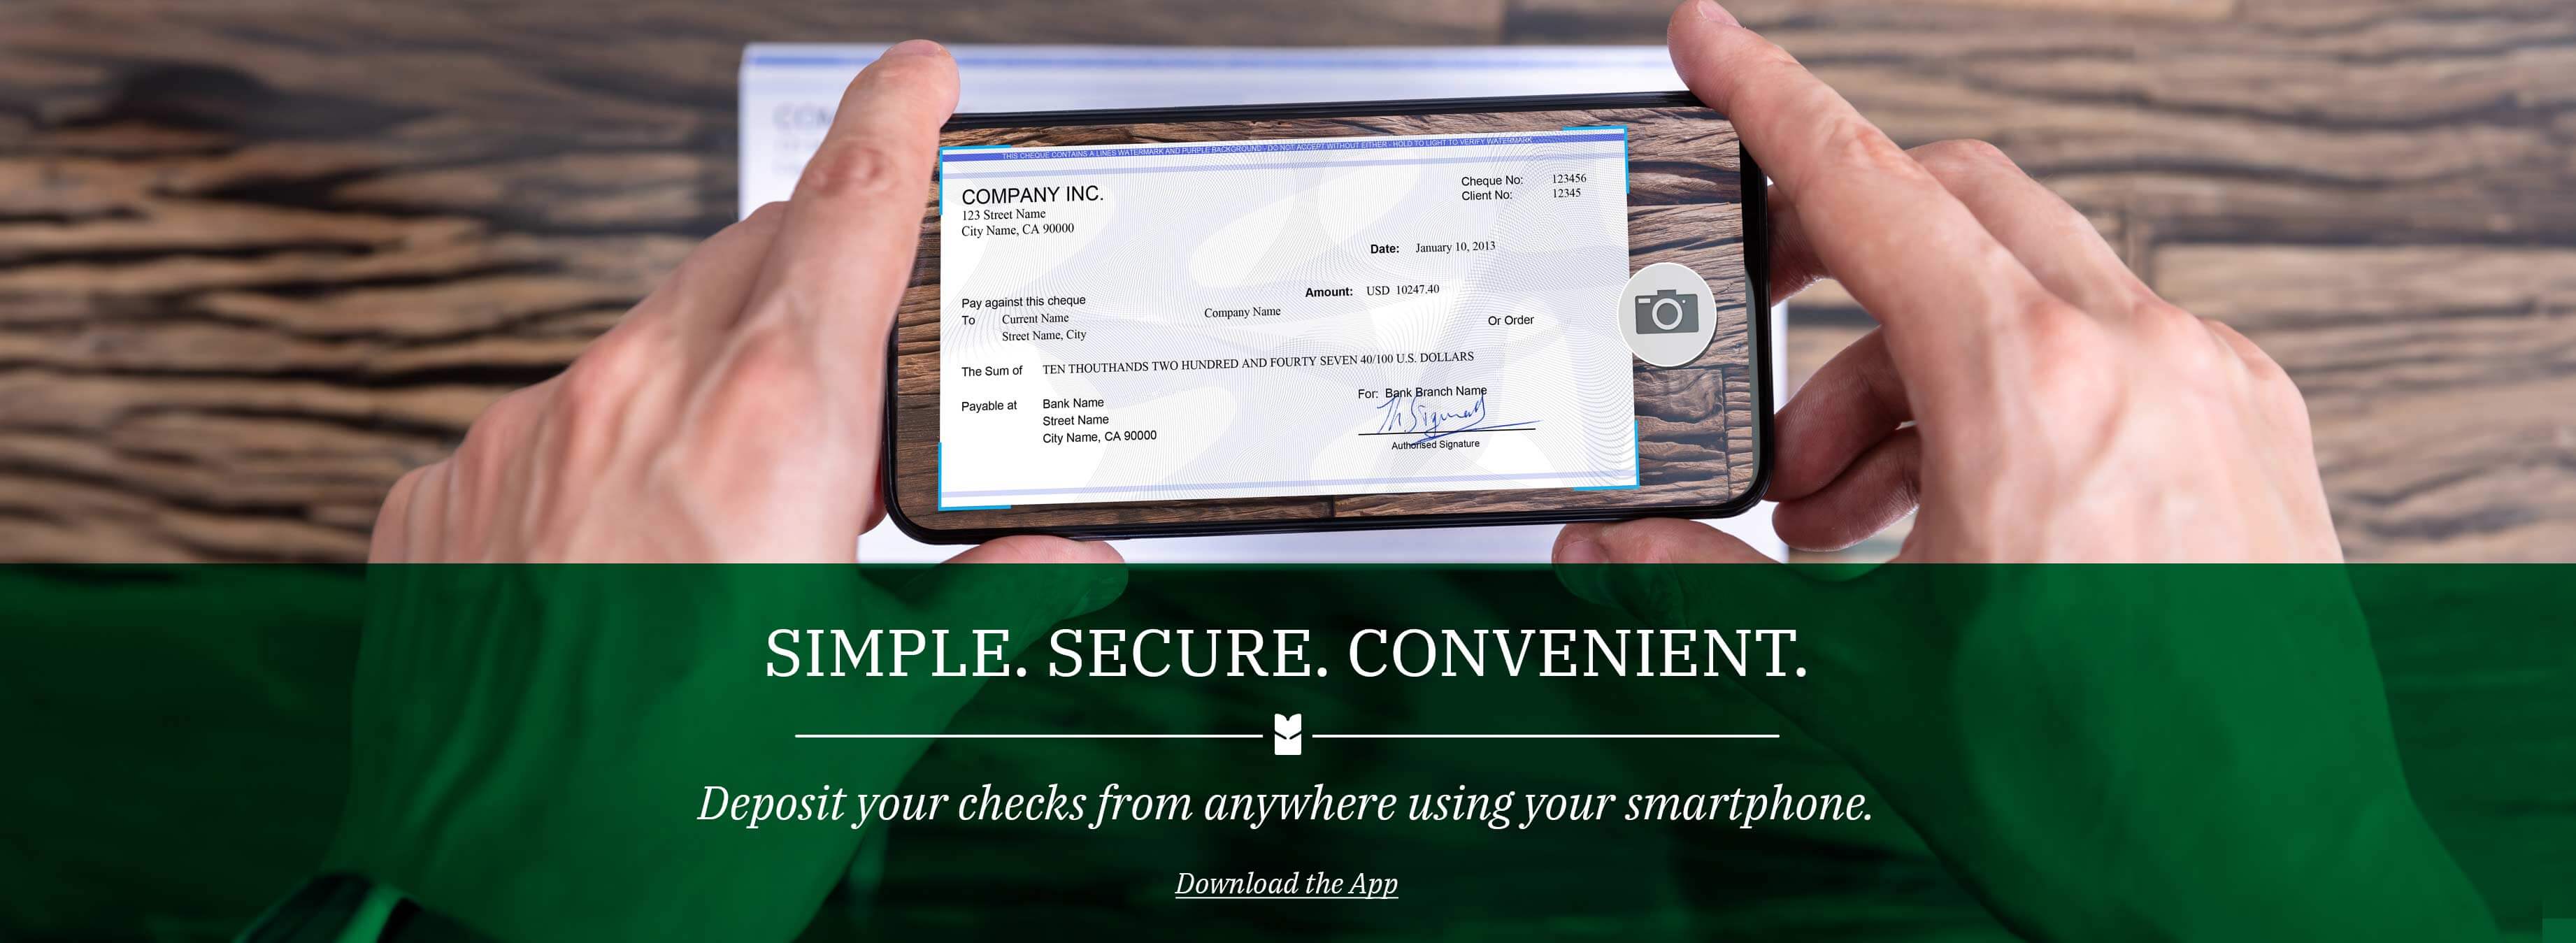 Simple. Secure. Convenient. Deposit your checks from anywhere using your smartphone. Download the app.